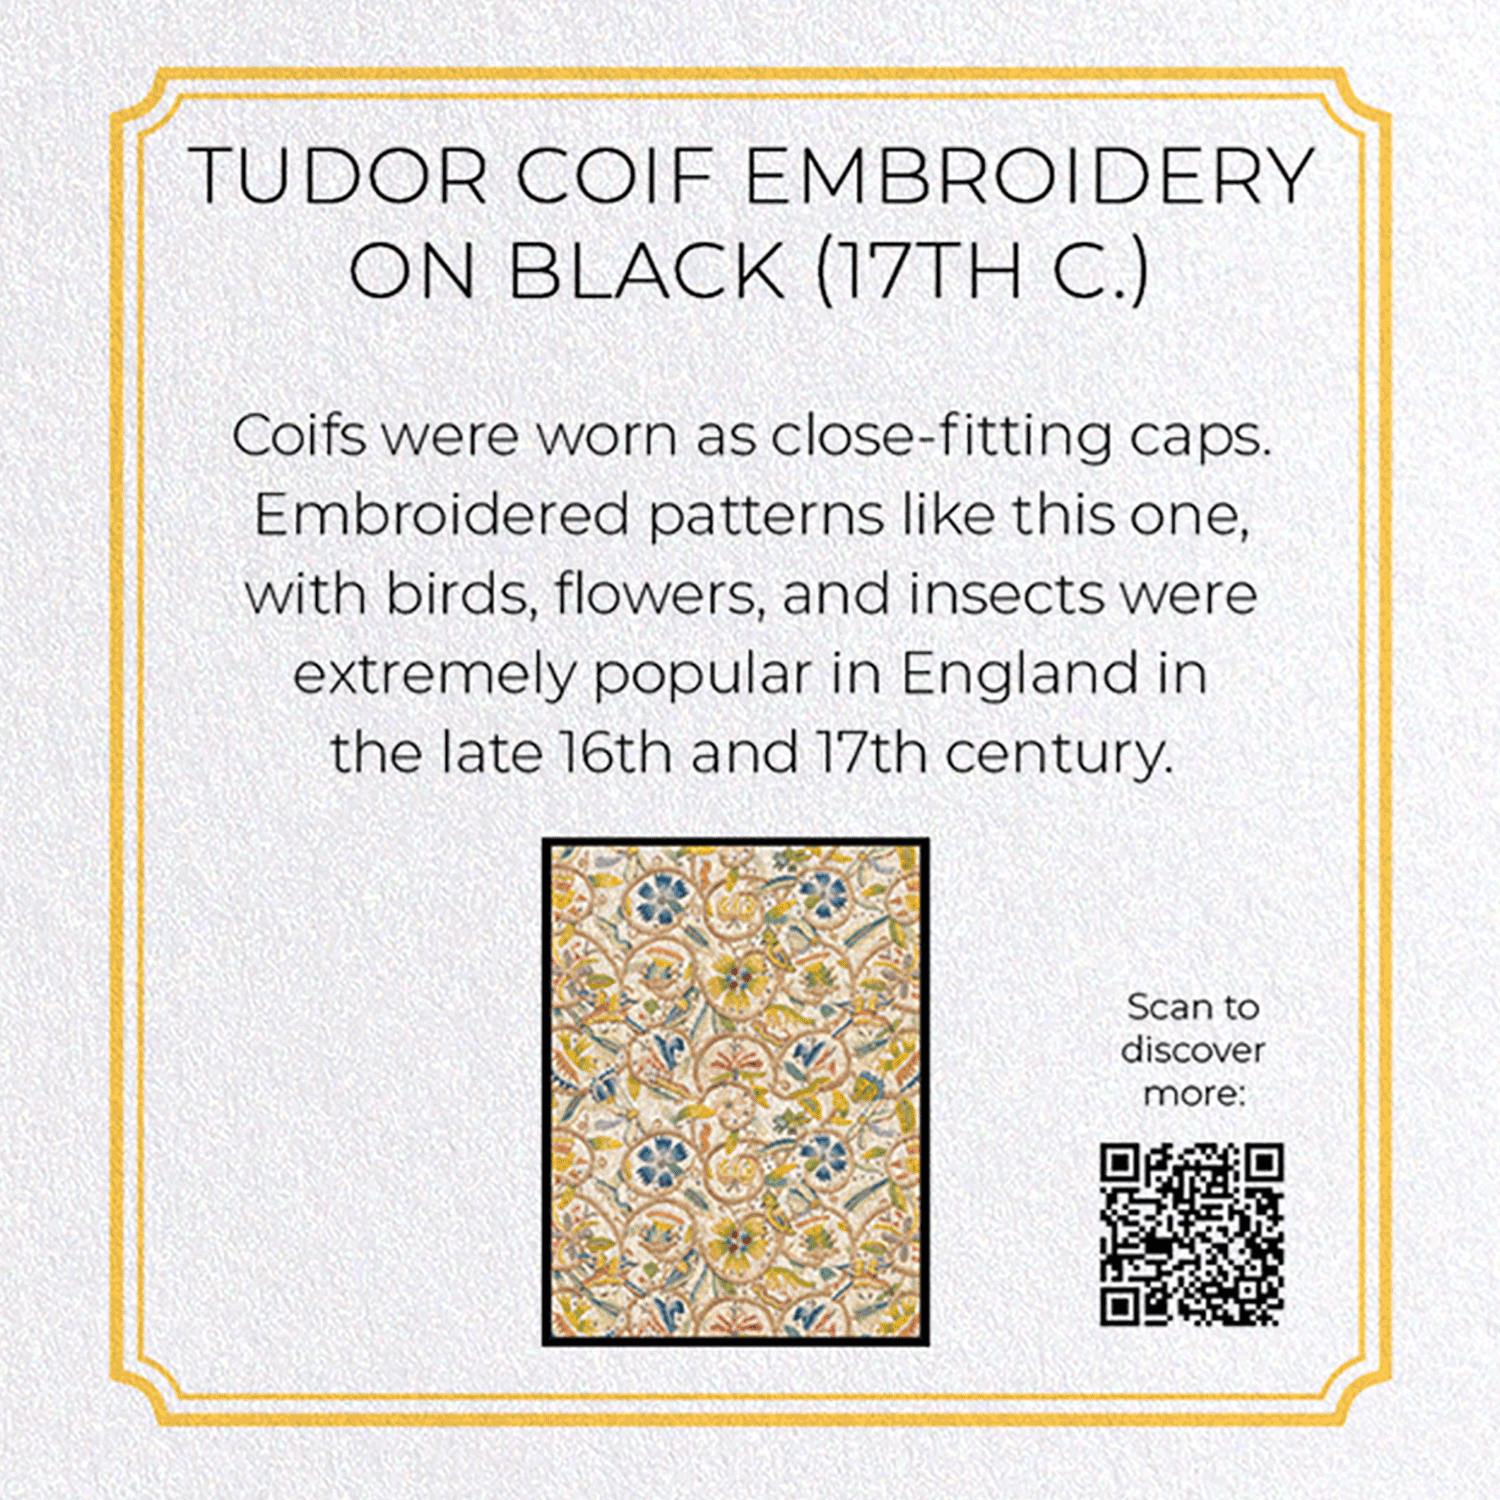 TUDOR COIF EMBROIDERY ON BLACK (17TH C.): Pattern Greeting Card